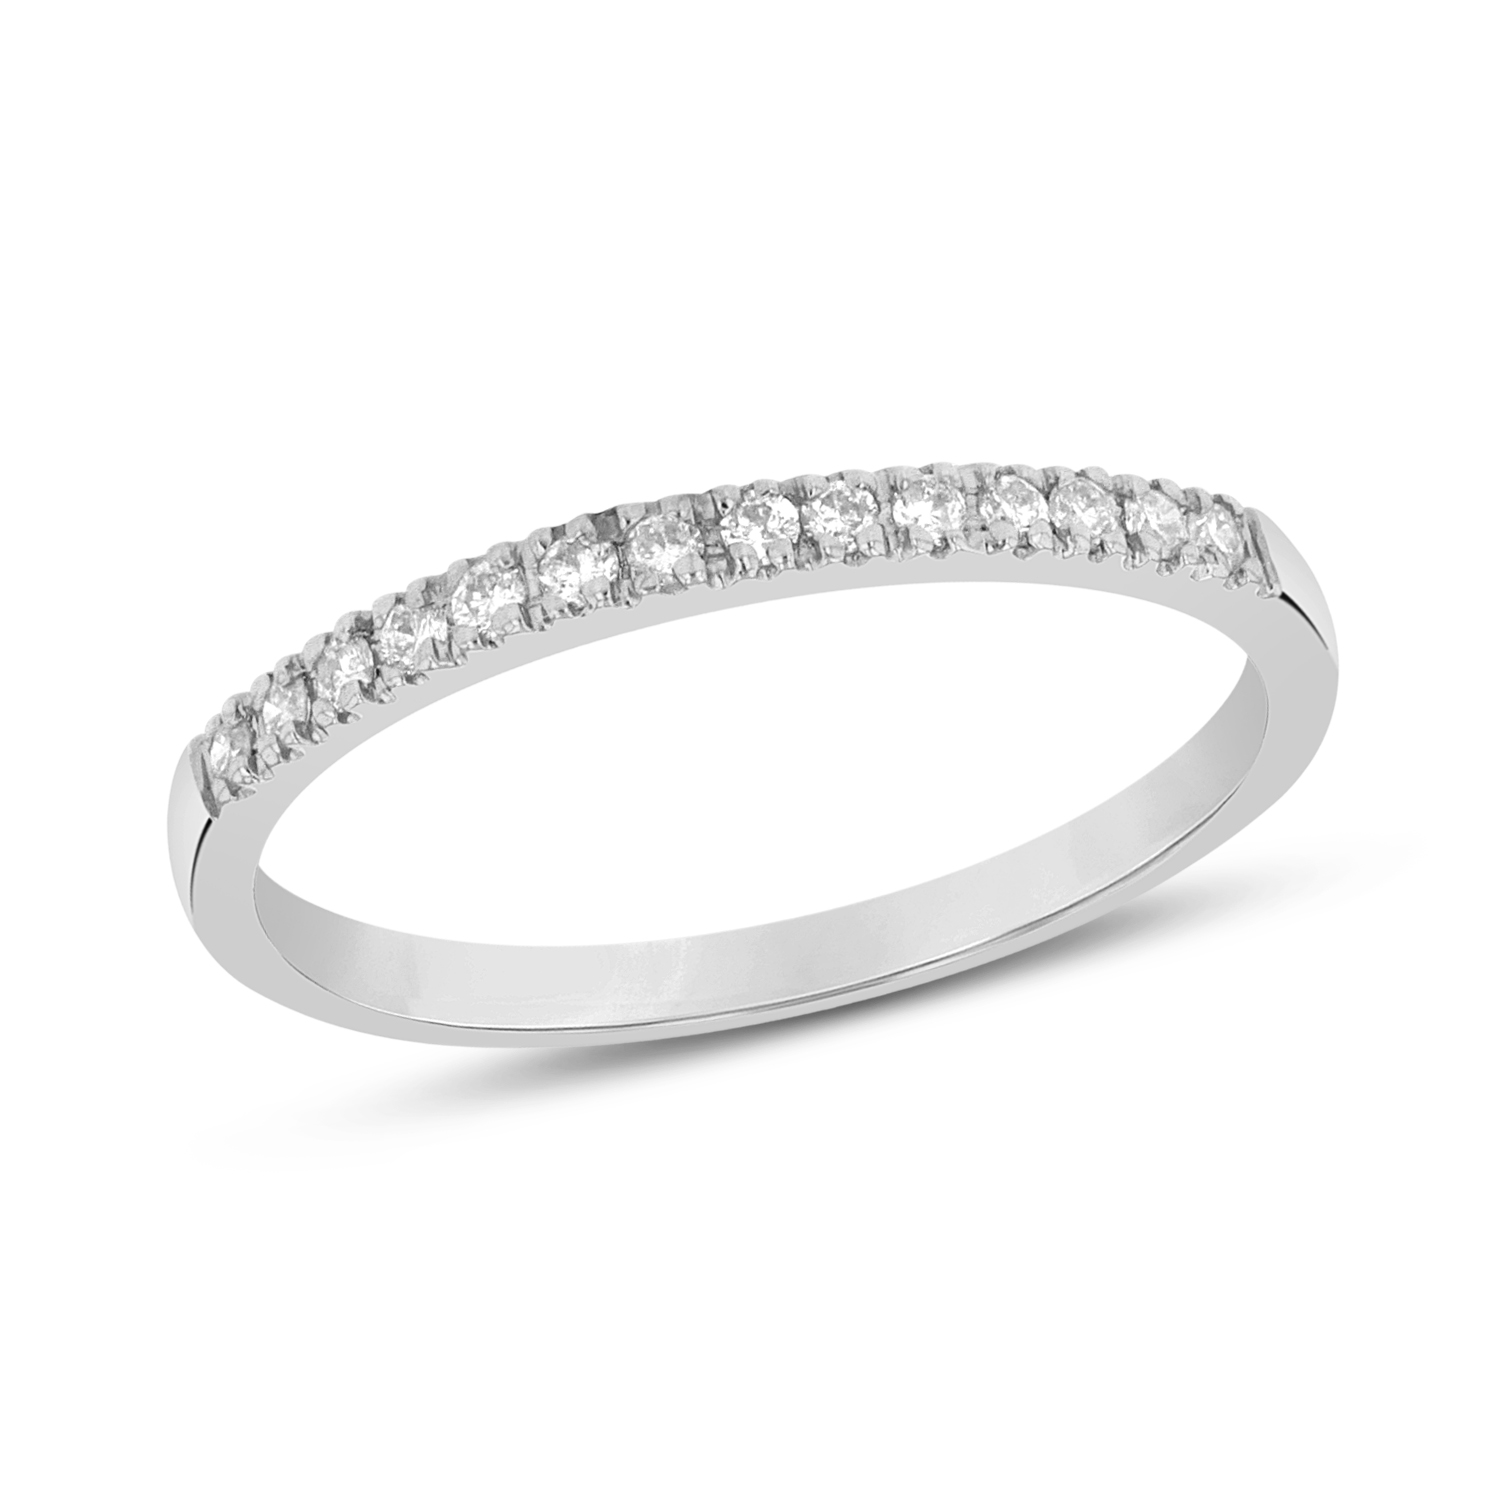 View 0.15ctw Diamond Band in 14k White Gold